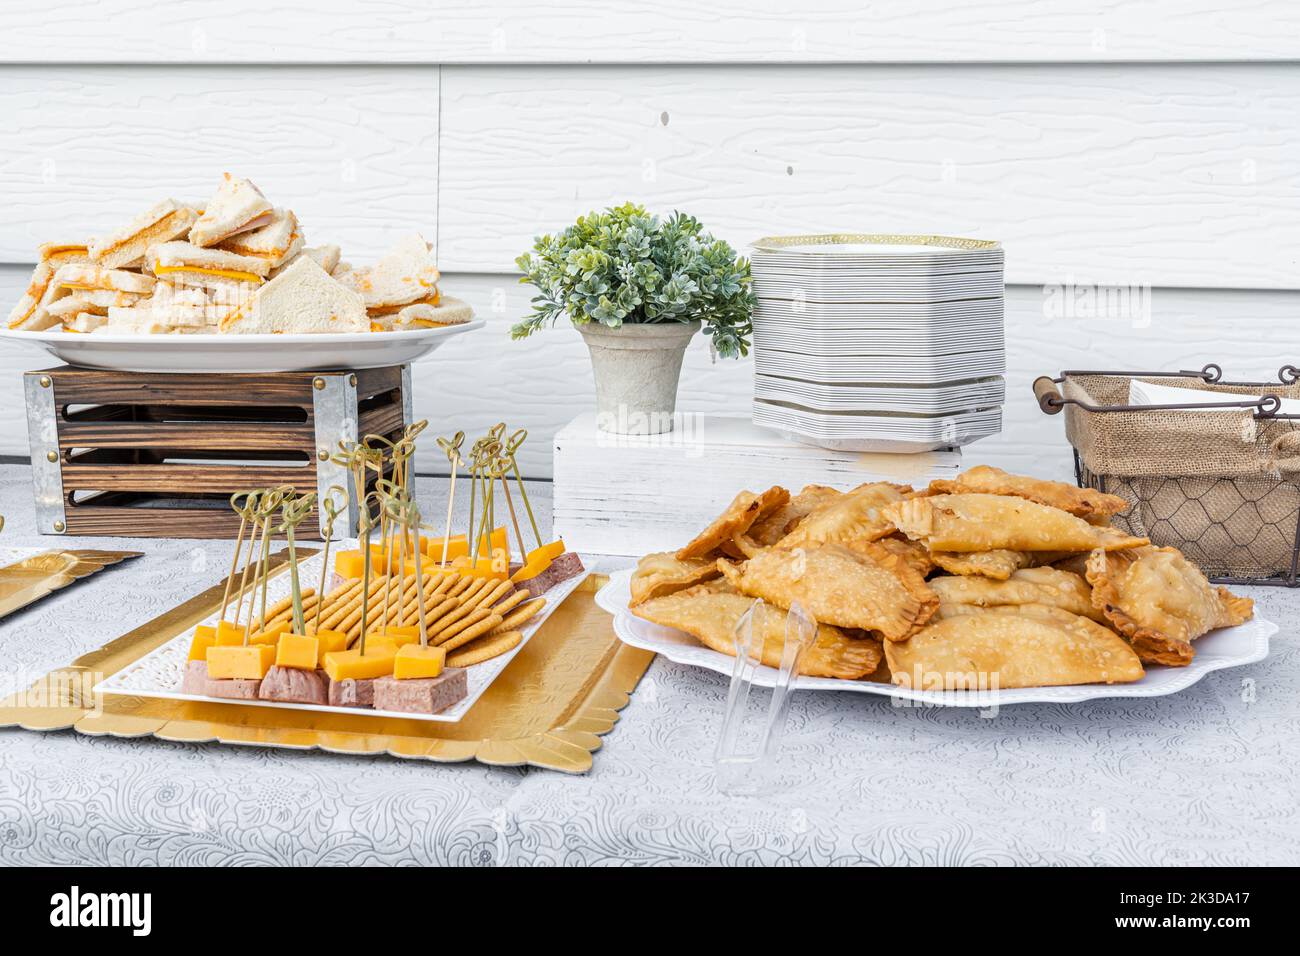 Traditional Dominican Appetizers of Empanadas, Cheese Sandwiches and Skewer Salami and Cheese with Crackers on a Table. Stock Photo